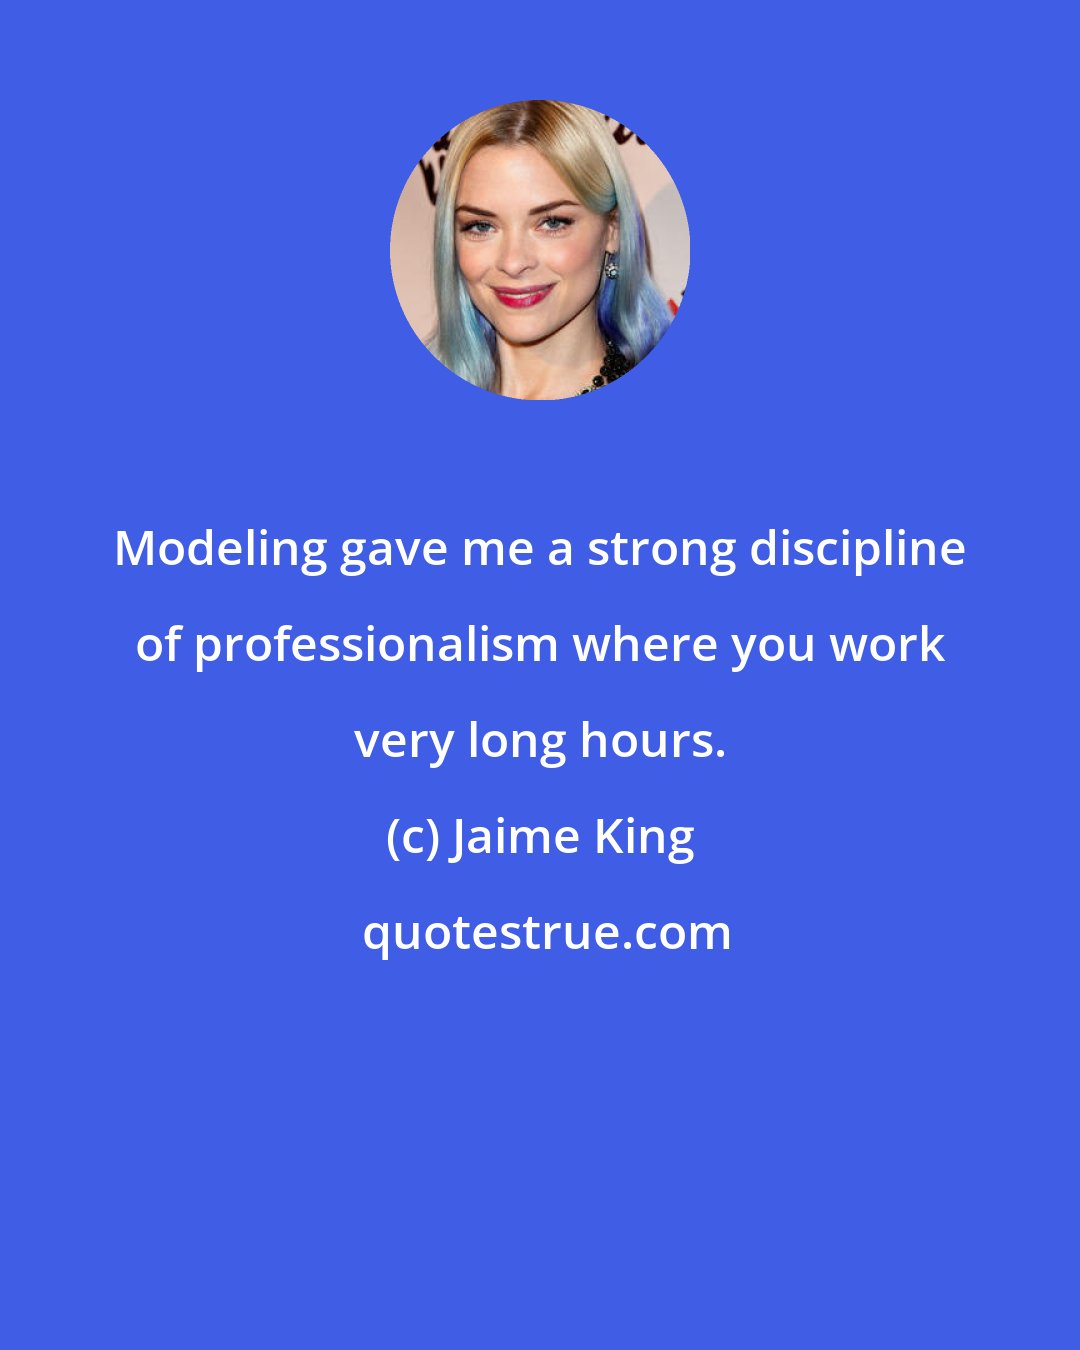 Jaime King: Modeling gave me a strong discipline of professionalism where you work very long hours.